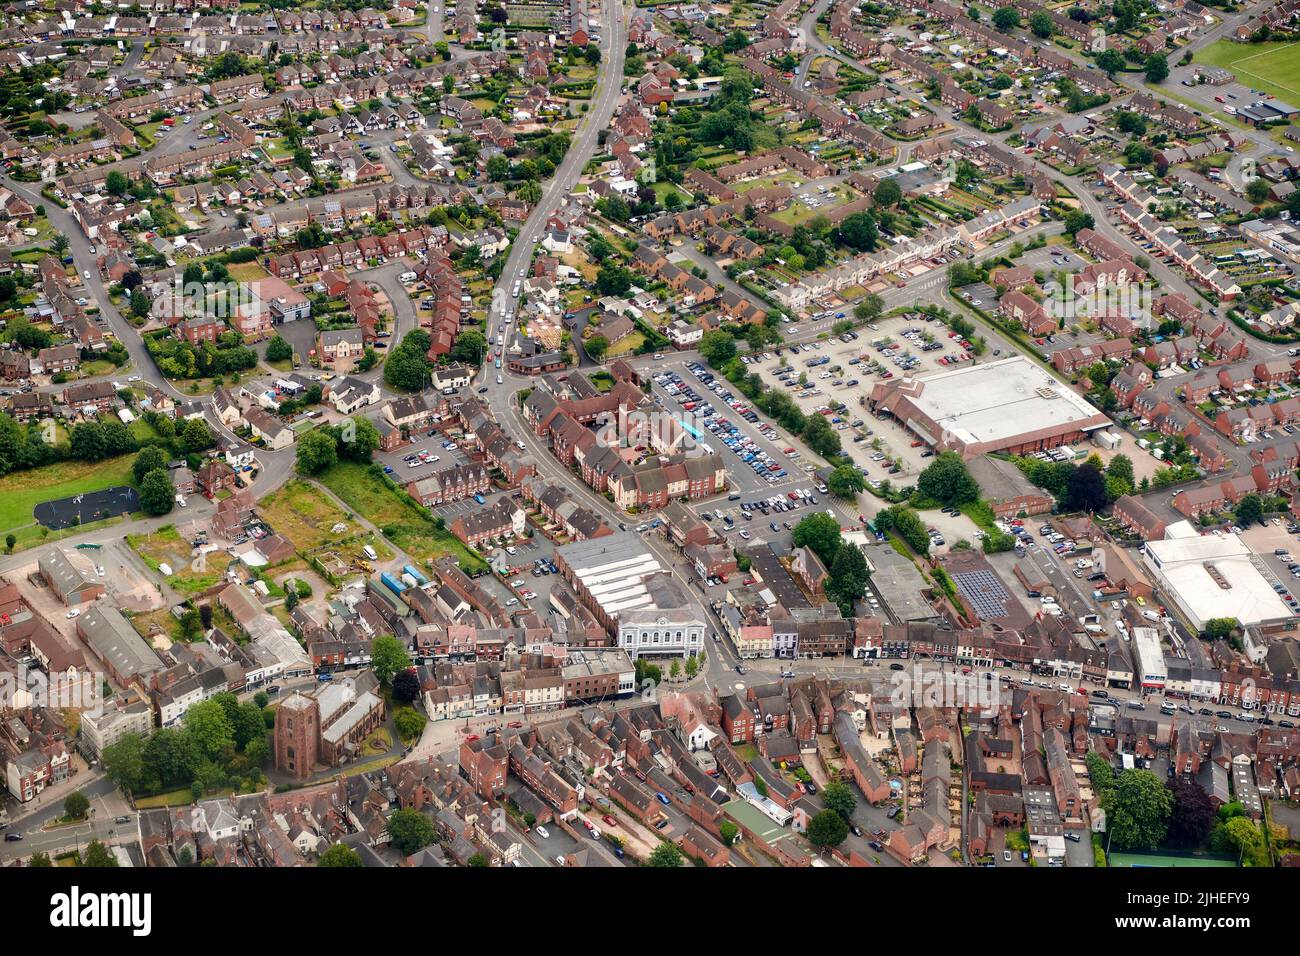 An aerial view of the market town of Newport, telford & Wrekin, Shropshire, West Midlands, England, UK Stock Photo